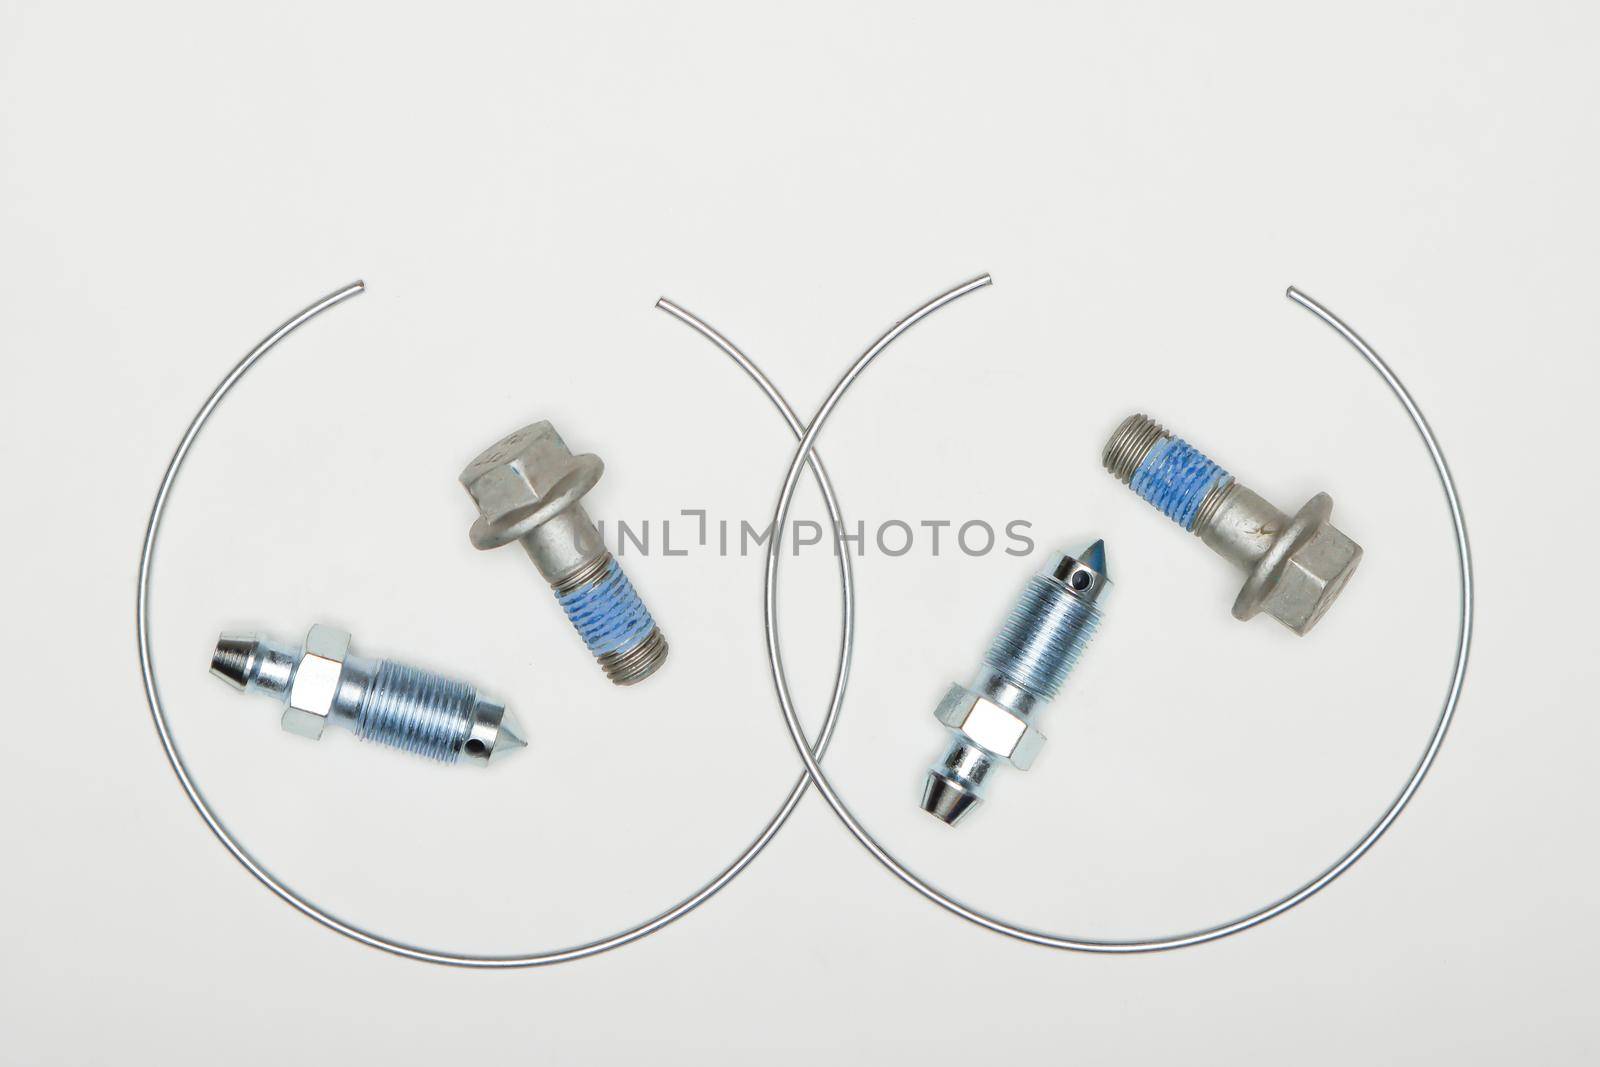 Caliper repair kit, metal retaining rings, union and bolts. Set of spare parts for car brake repair. Details on white background, copy space available. UHD 4K.